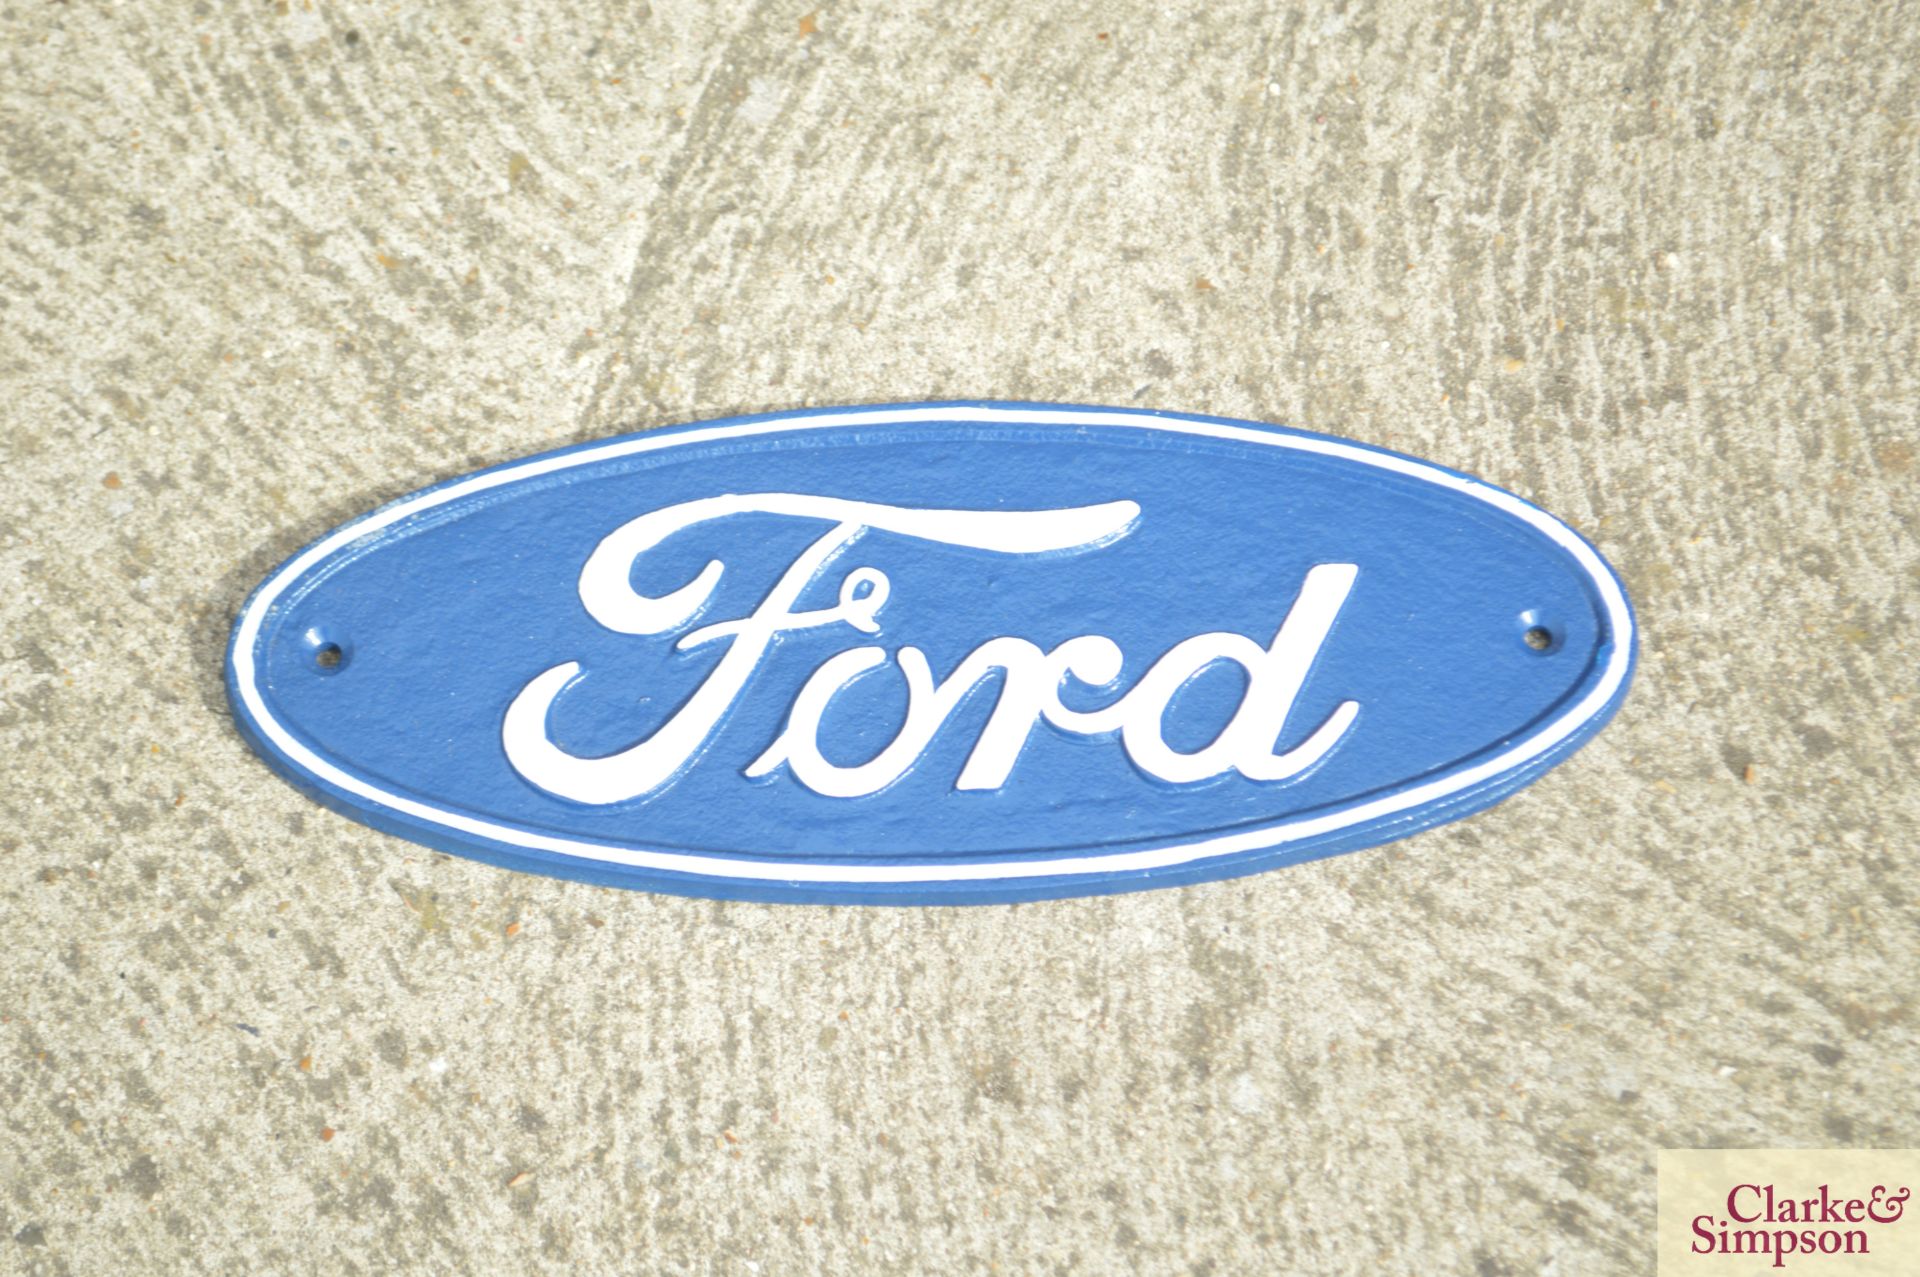 Oval Ford sign.*